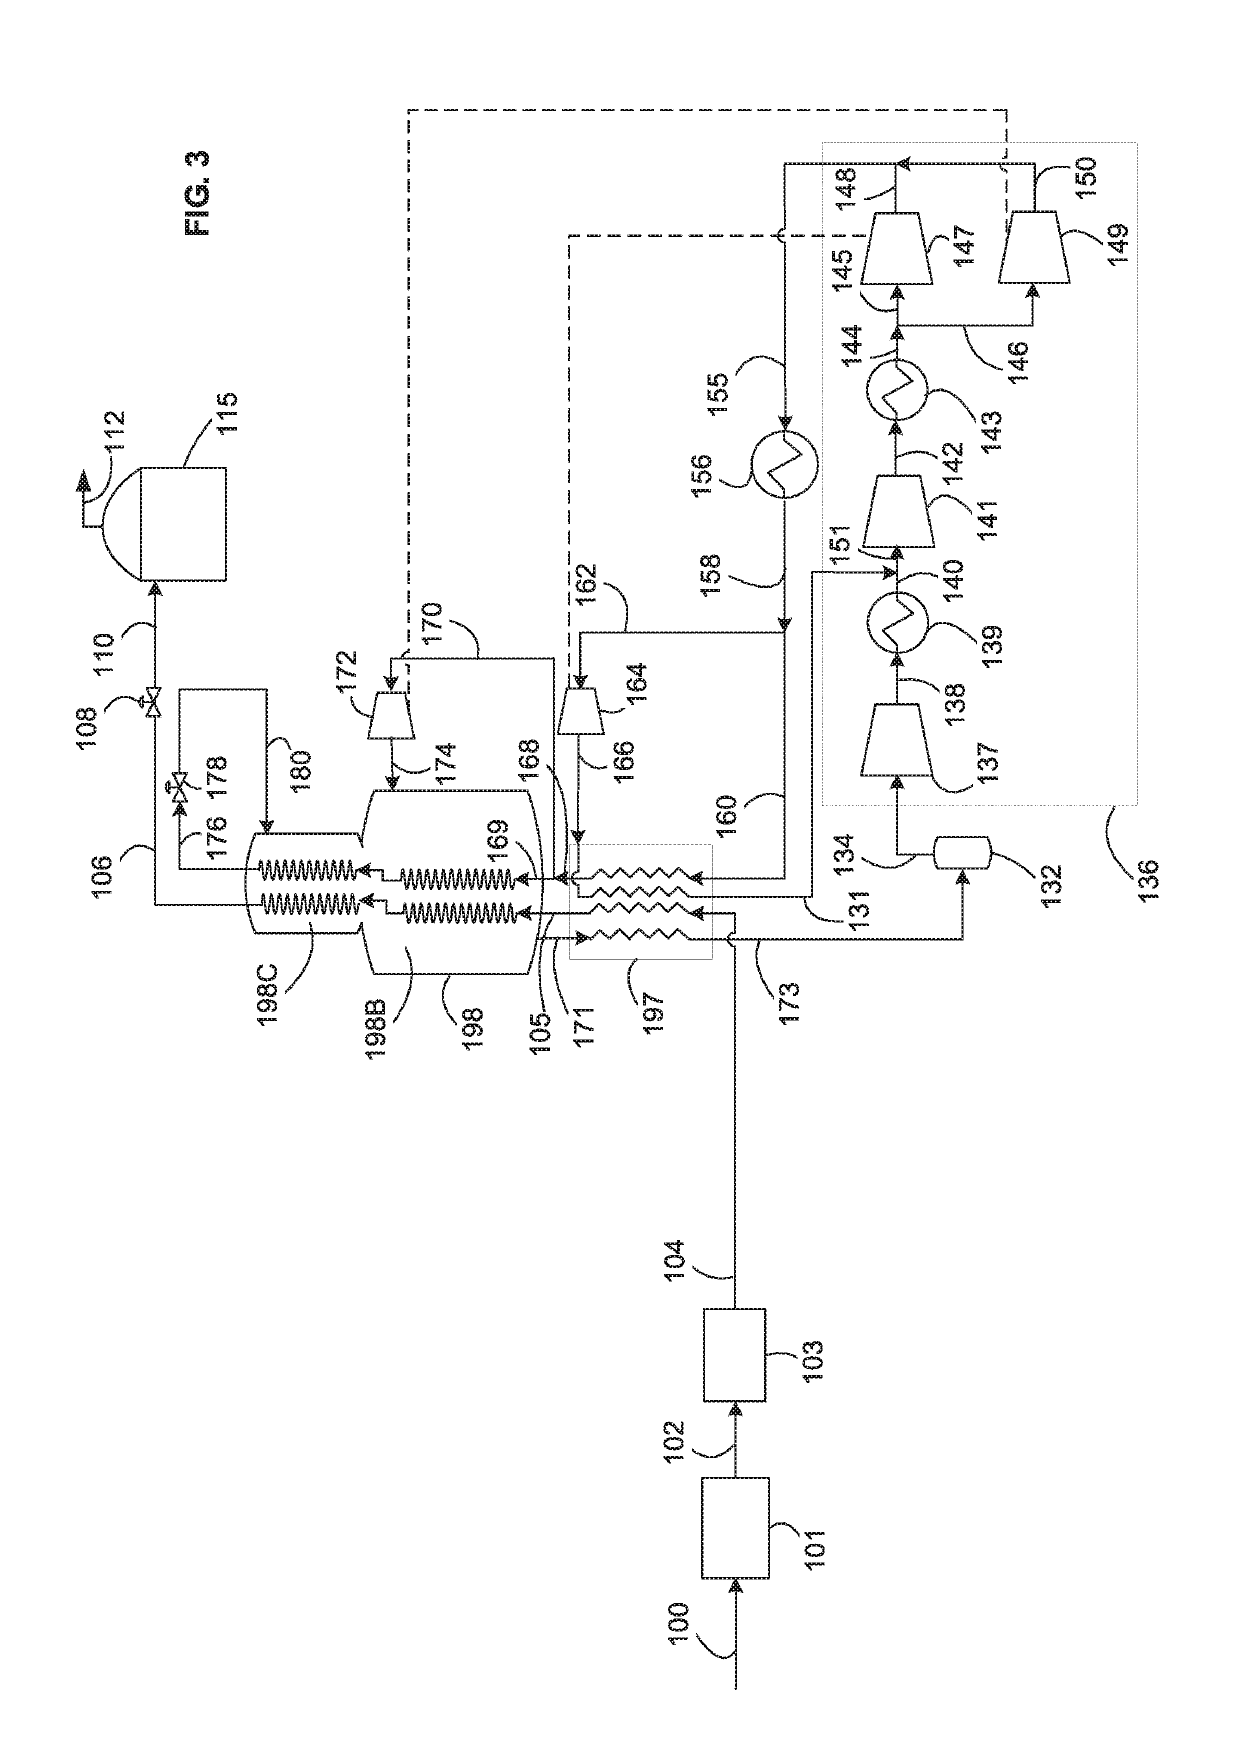 Method and System for Cooling a Hydrocarbon Stream Using a Gas Phase Refrigerant